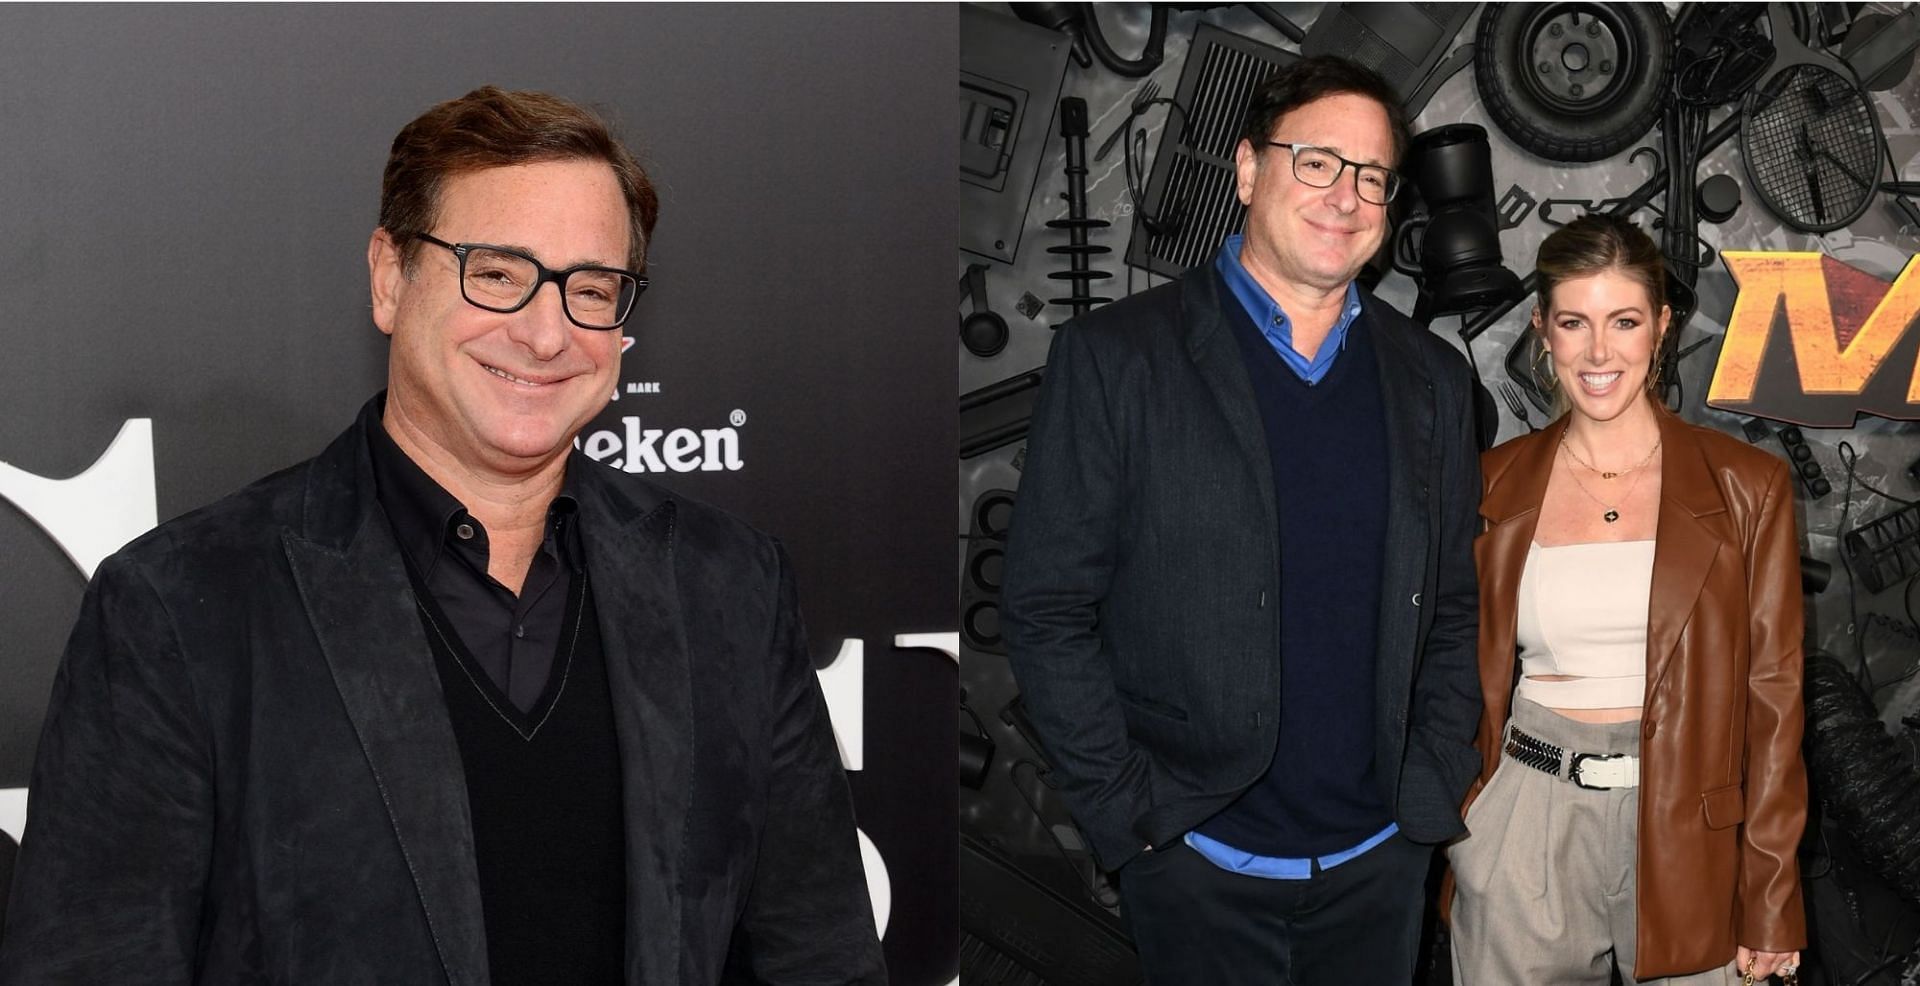 Bob Saget was found dead in his hotel room in Florida (Image via Andrew Toth/Getty Images and JC Olivera/Getty Images)